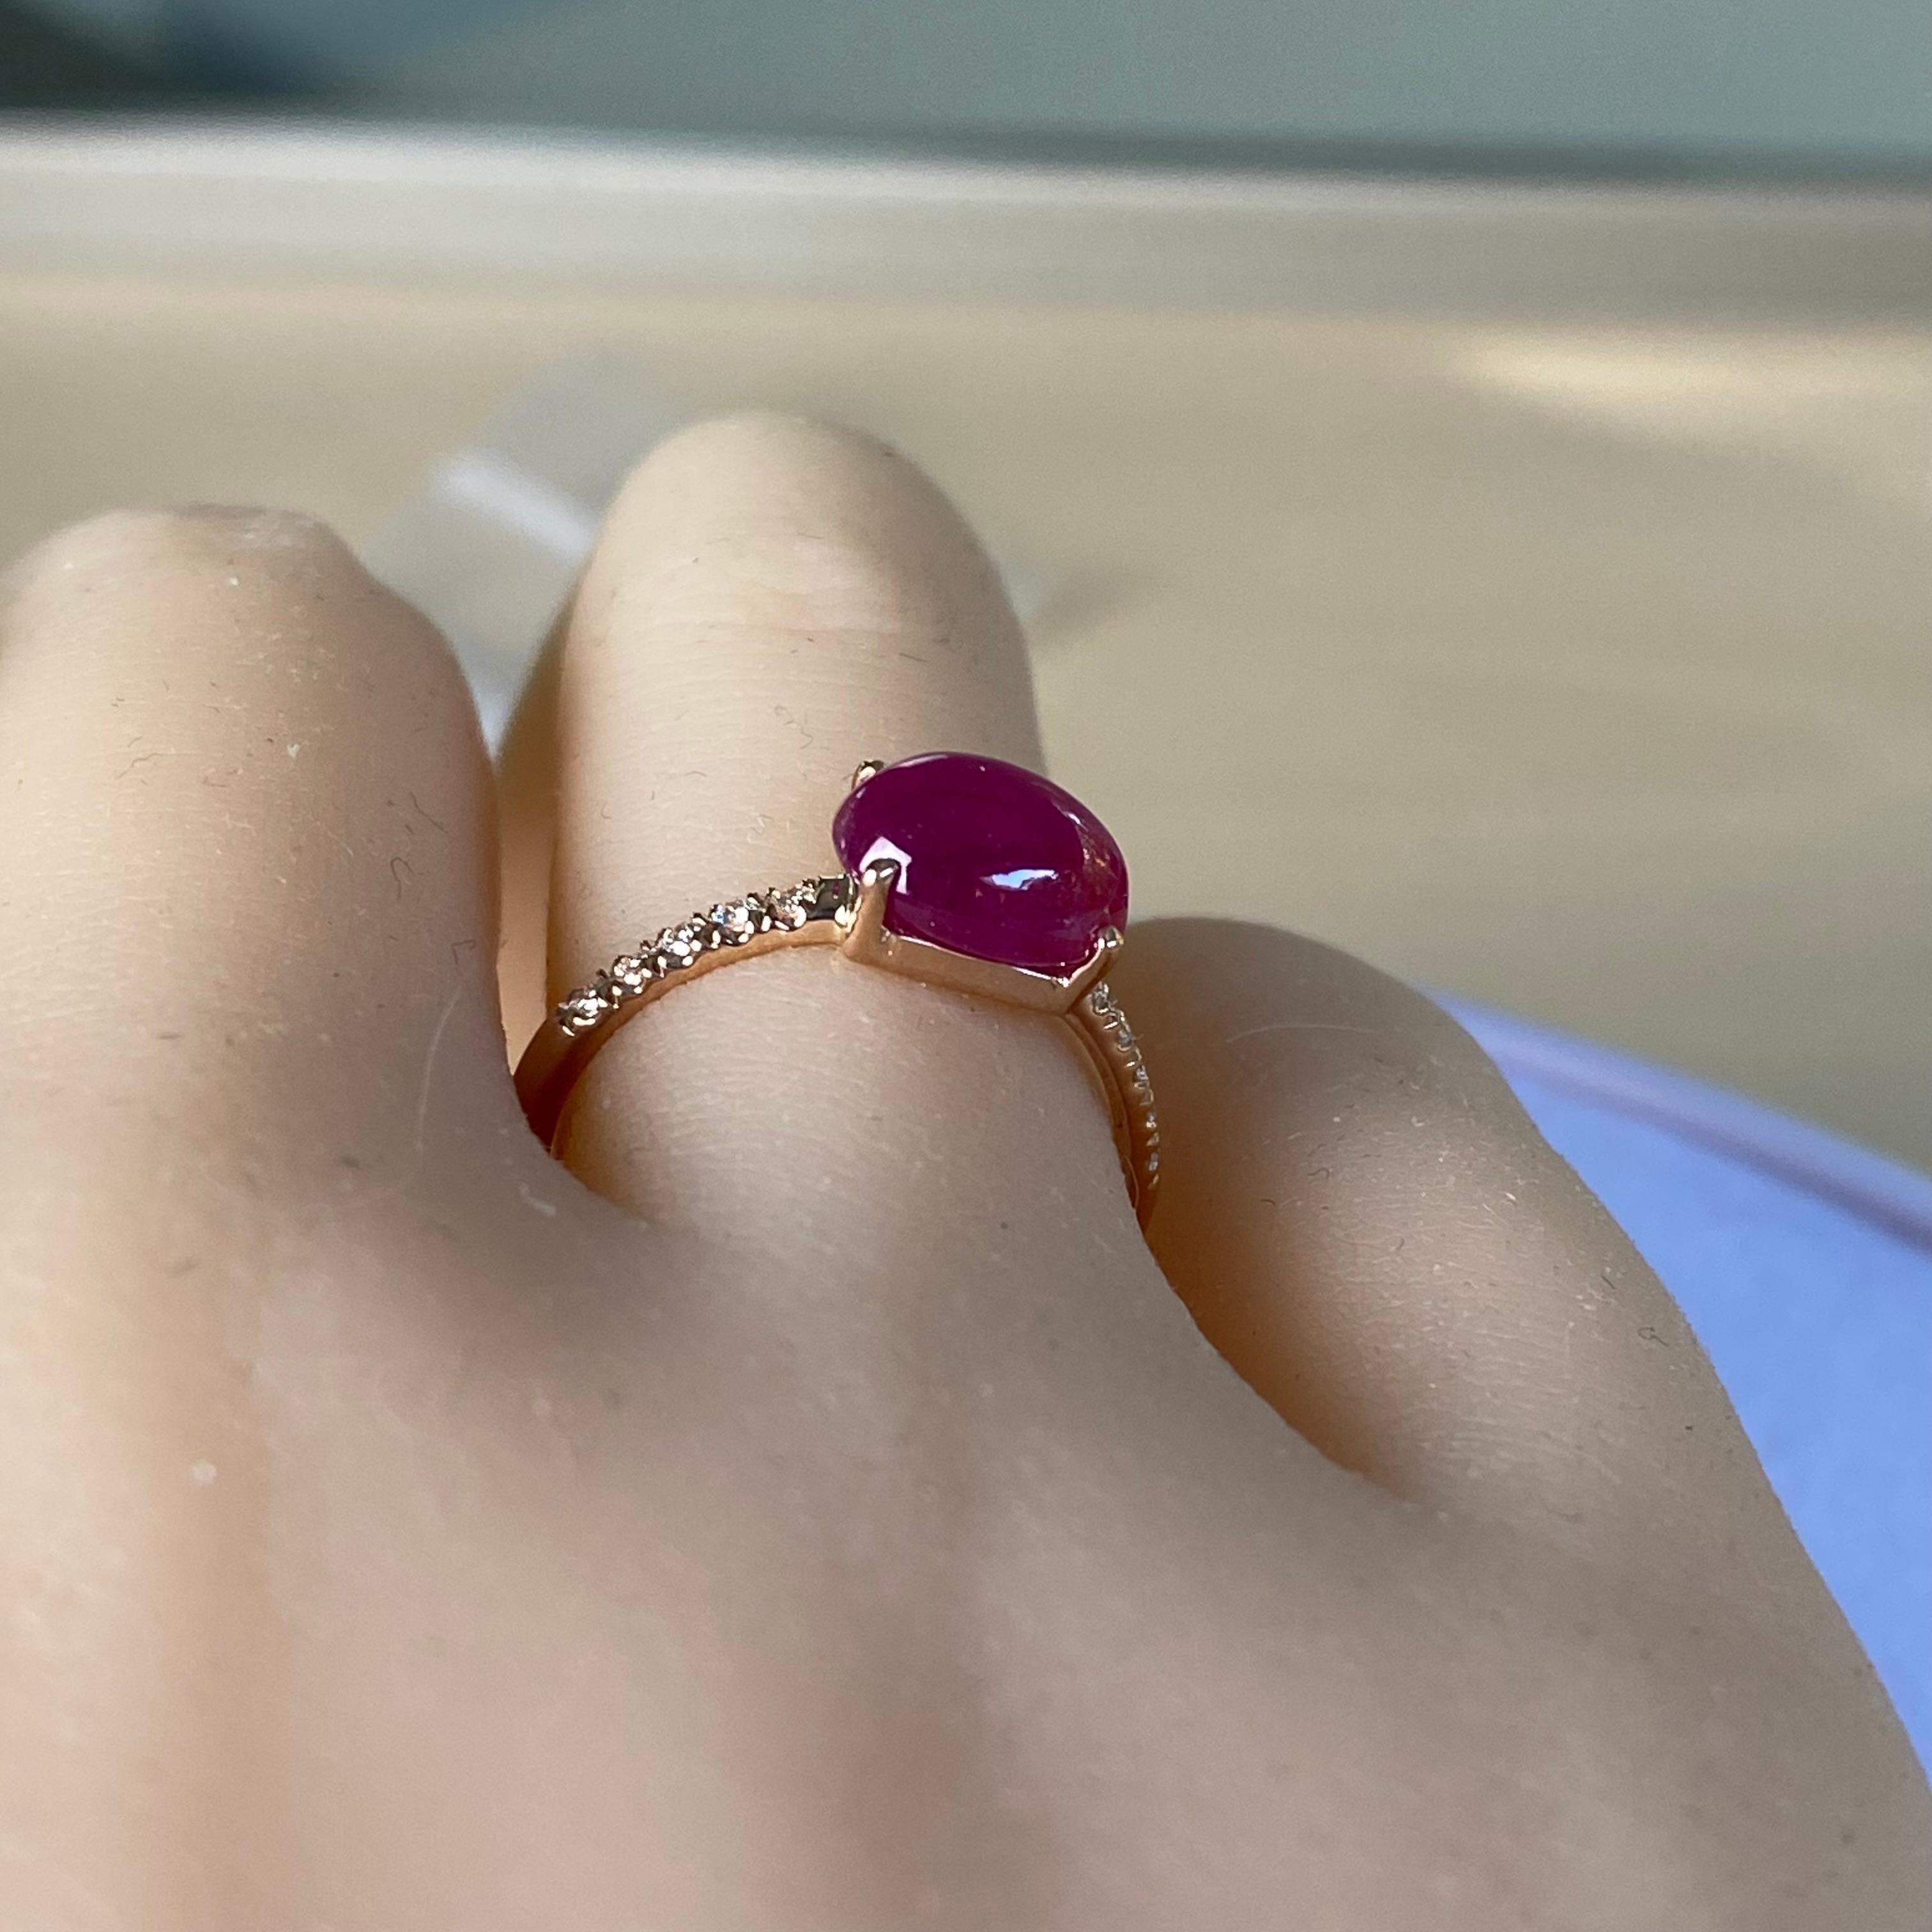 Cabochon Burma Ruby 2.80 Carat Diamond 0.25 Carat Rose Gold Cocktail Ring For Sale 1